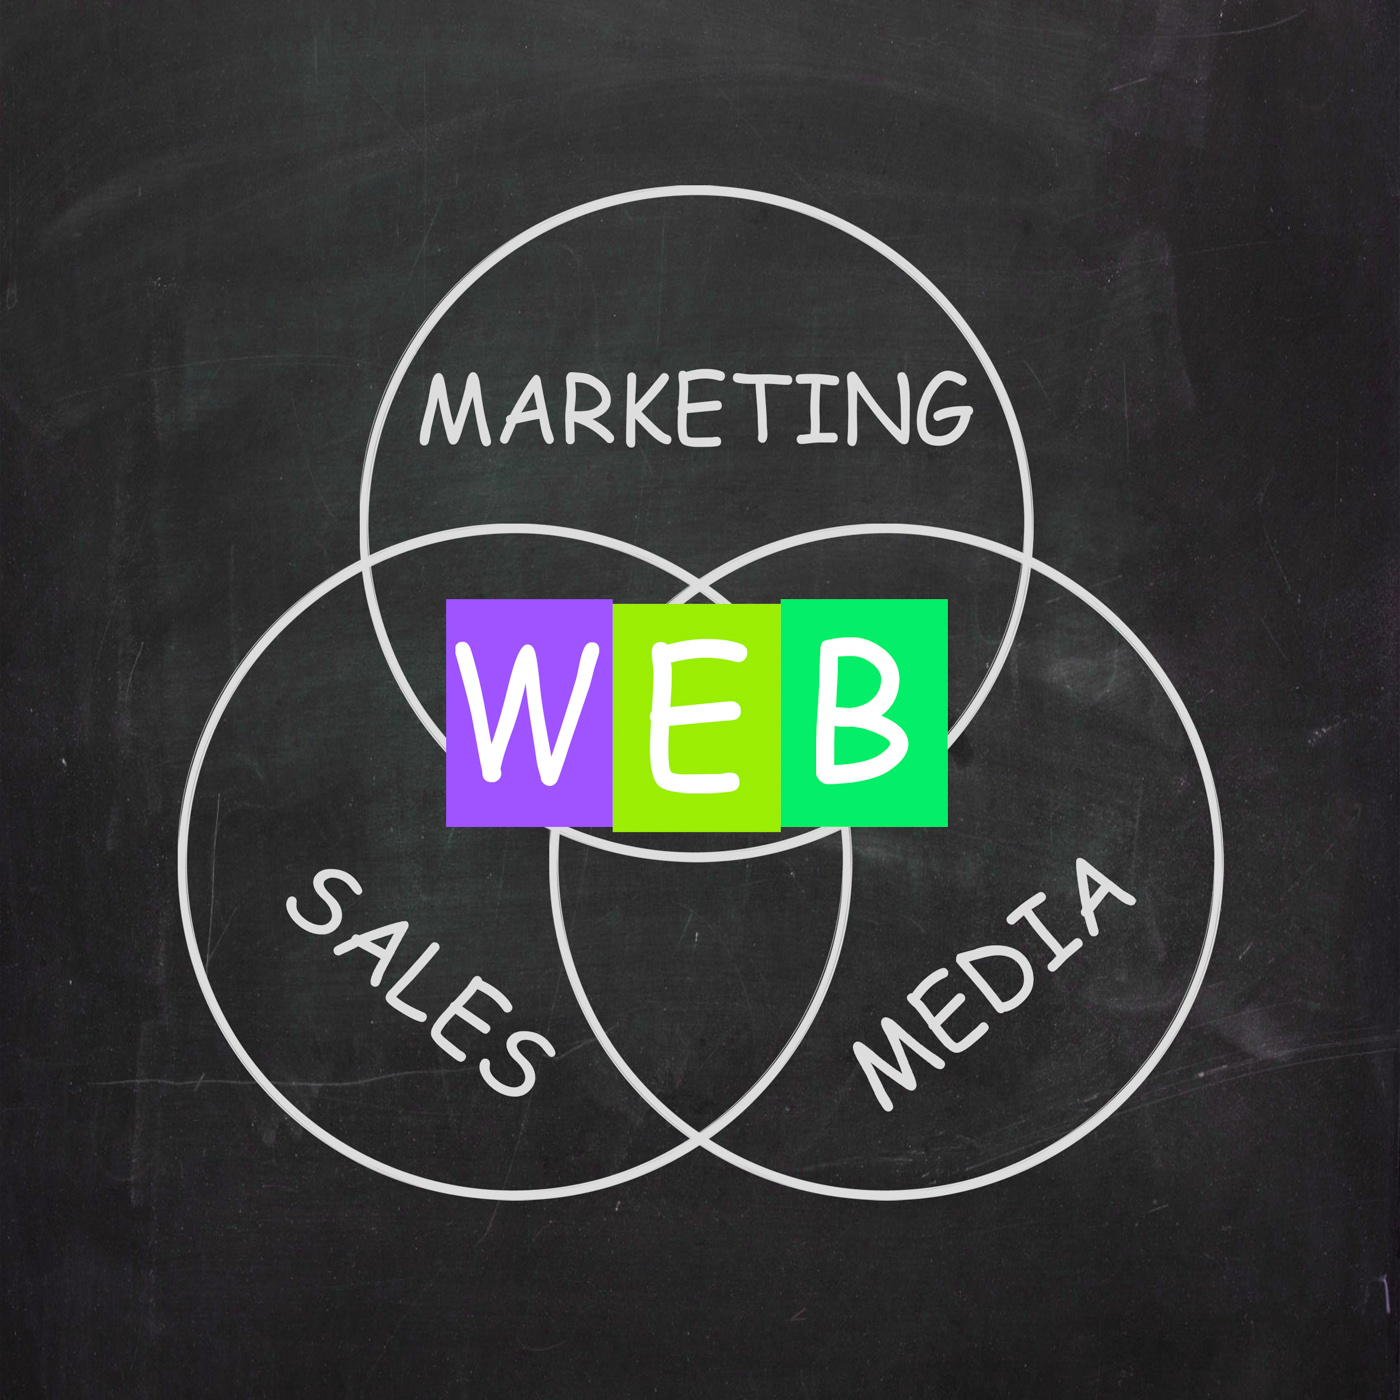 Web on blackboard means online marketing and sales photo